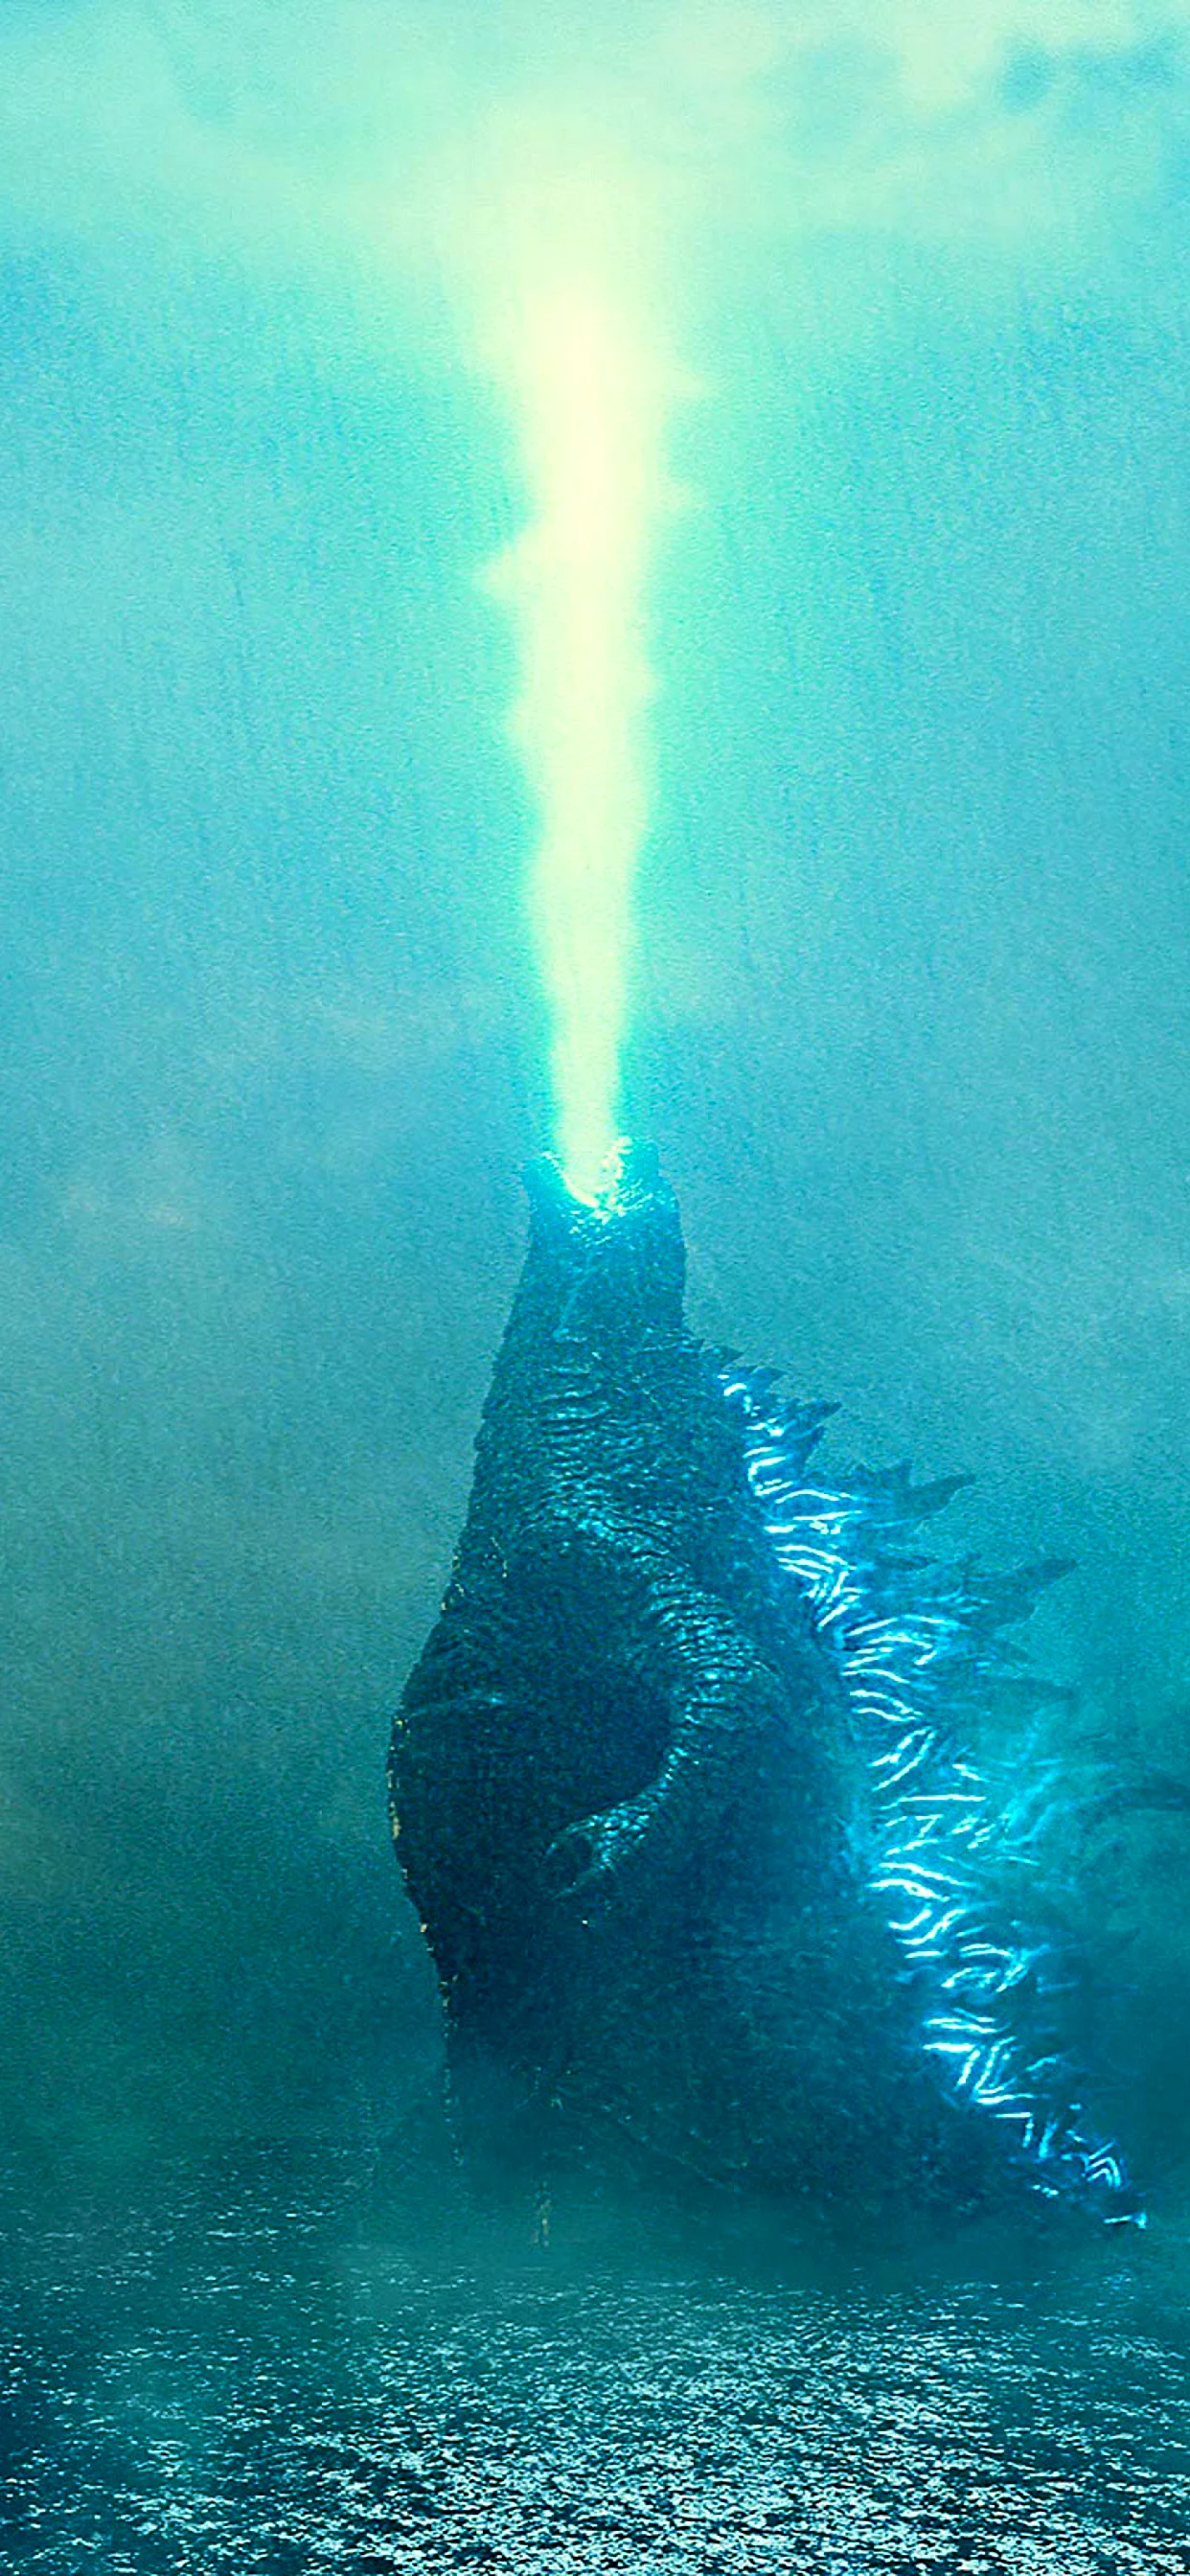 Godzilla King Of The Monsters 2019 Wallpaper for iPhone 11 Pro Max